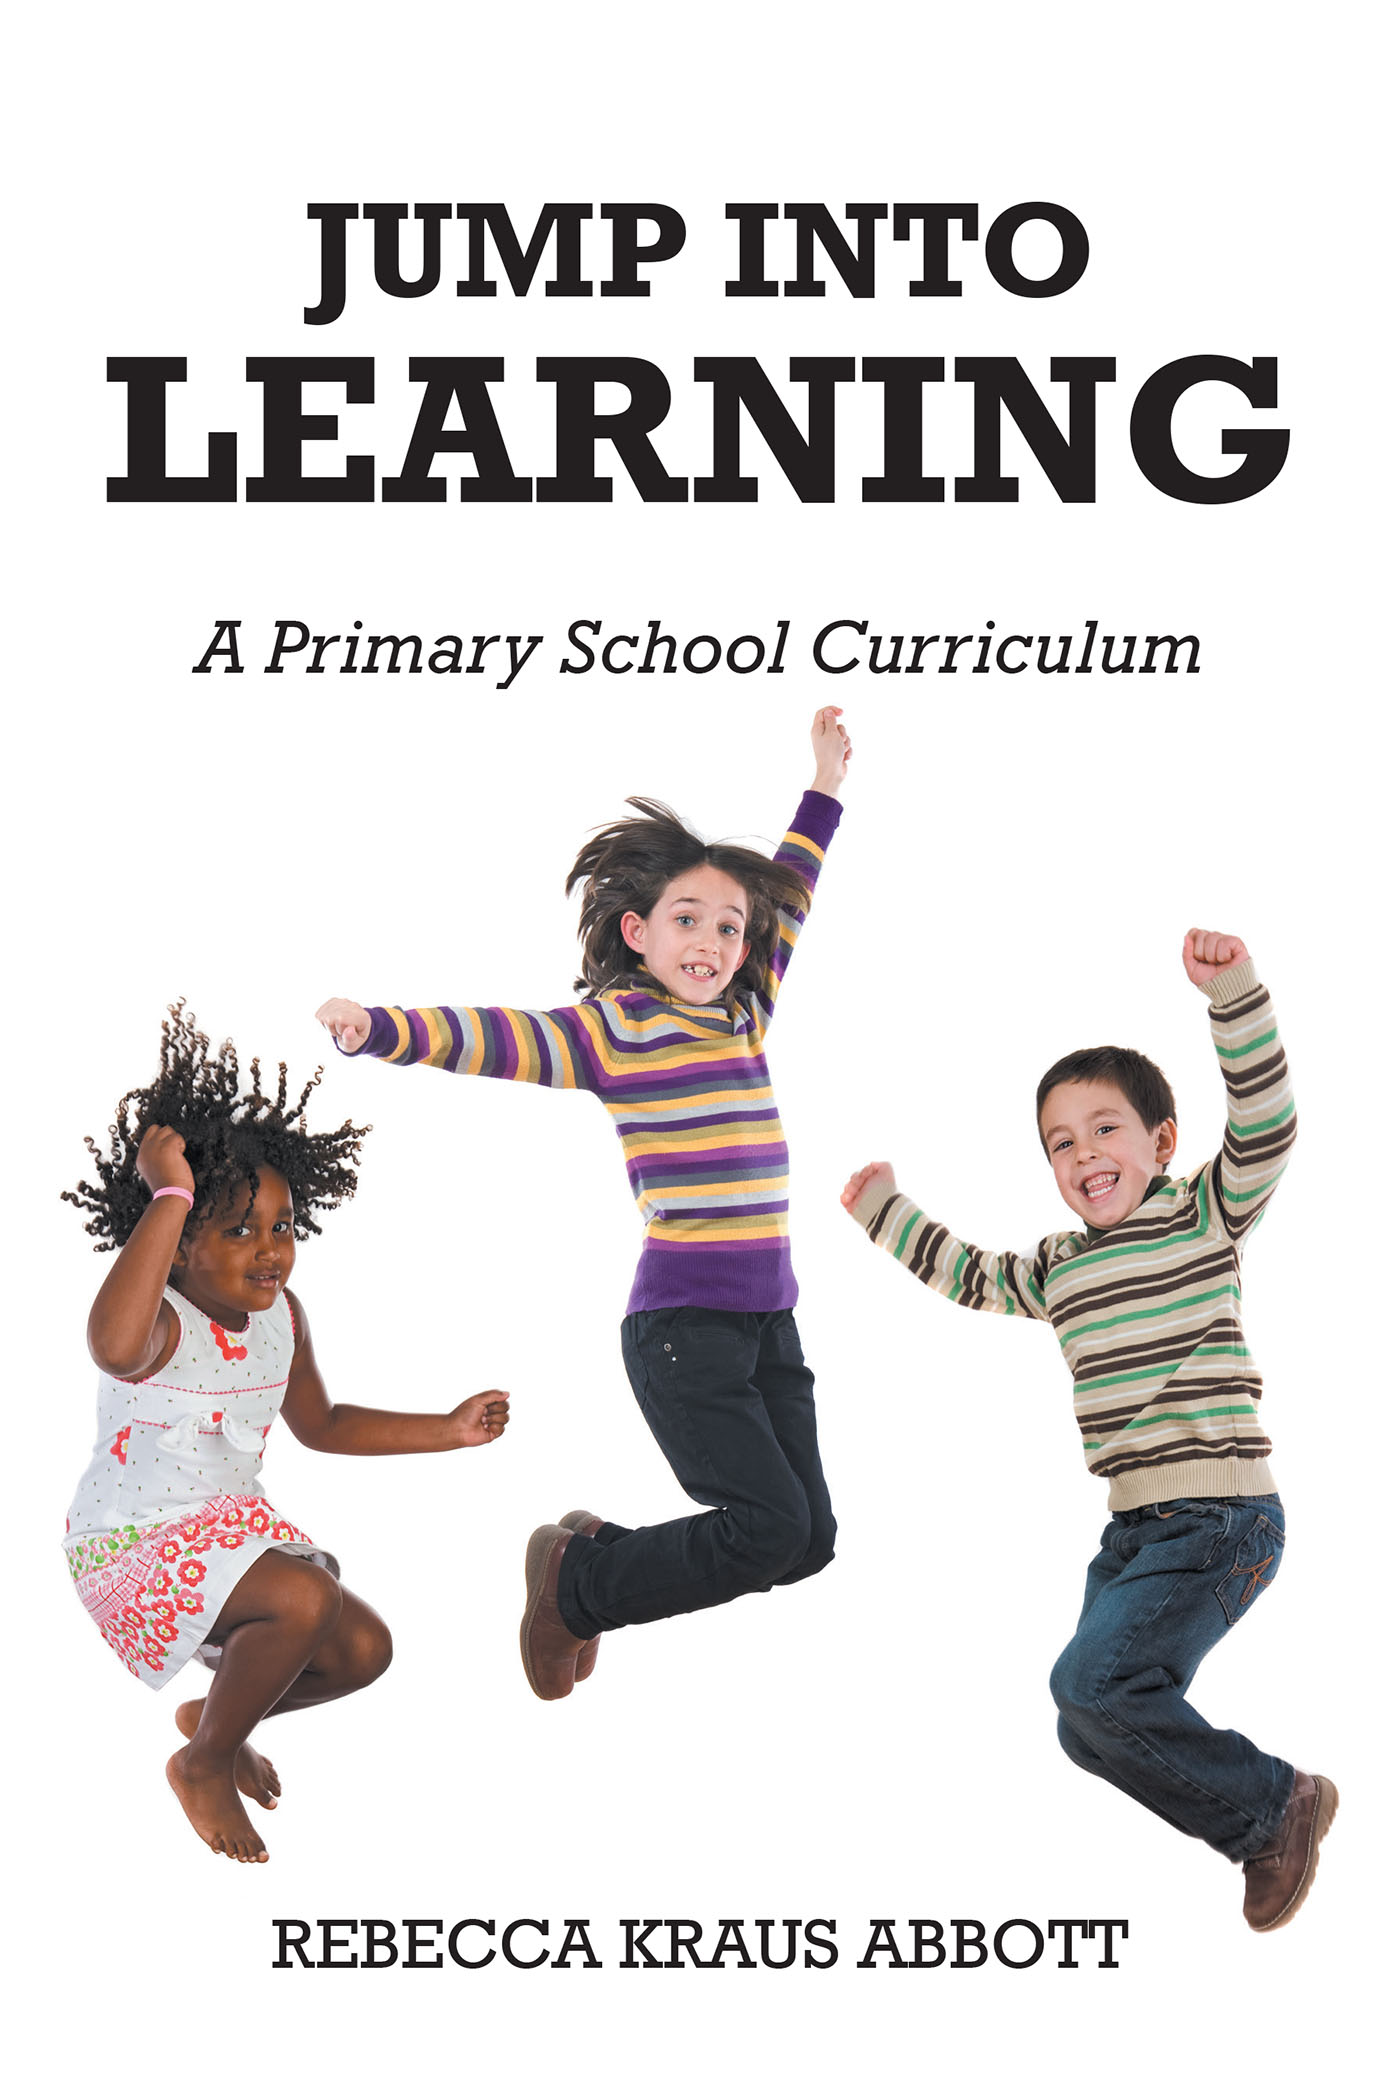 Rebecca Kraus Abbott’s Newly Released “Jump Into Learning: A Primary School Curriculum” is an Encouraging Approach to Successful Learning